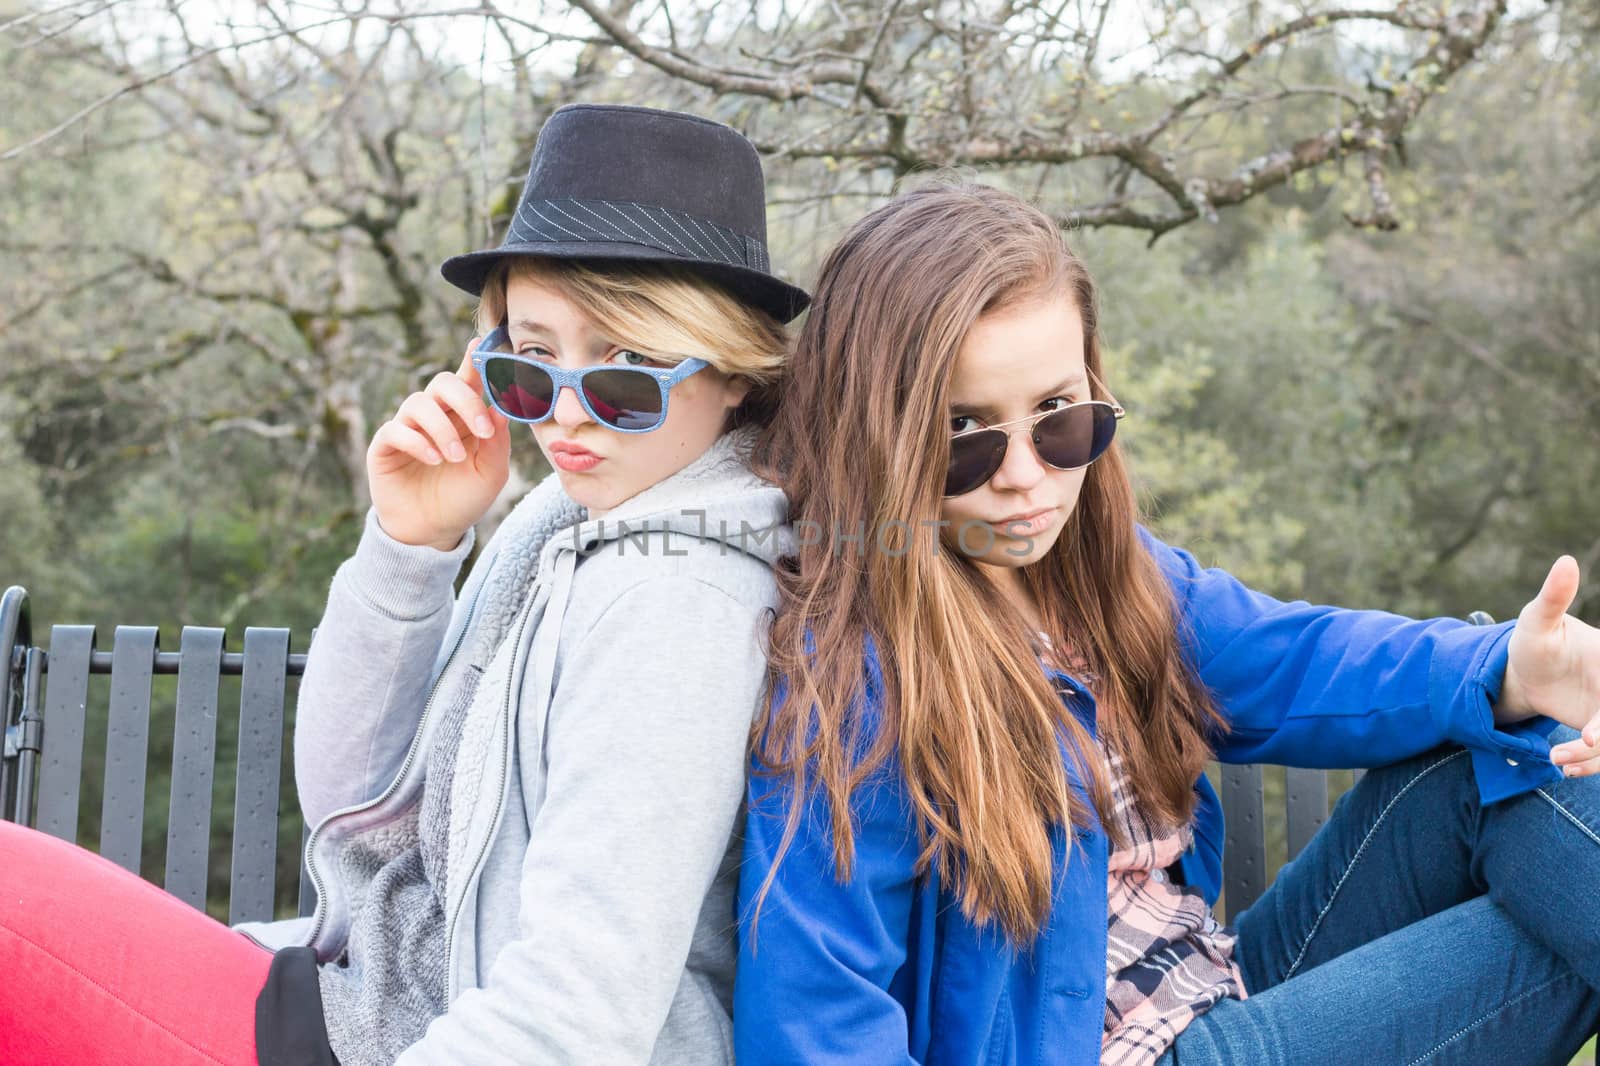 Two Girls Sitting on a Bench with Sunglasses